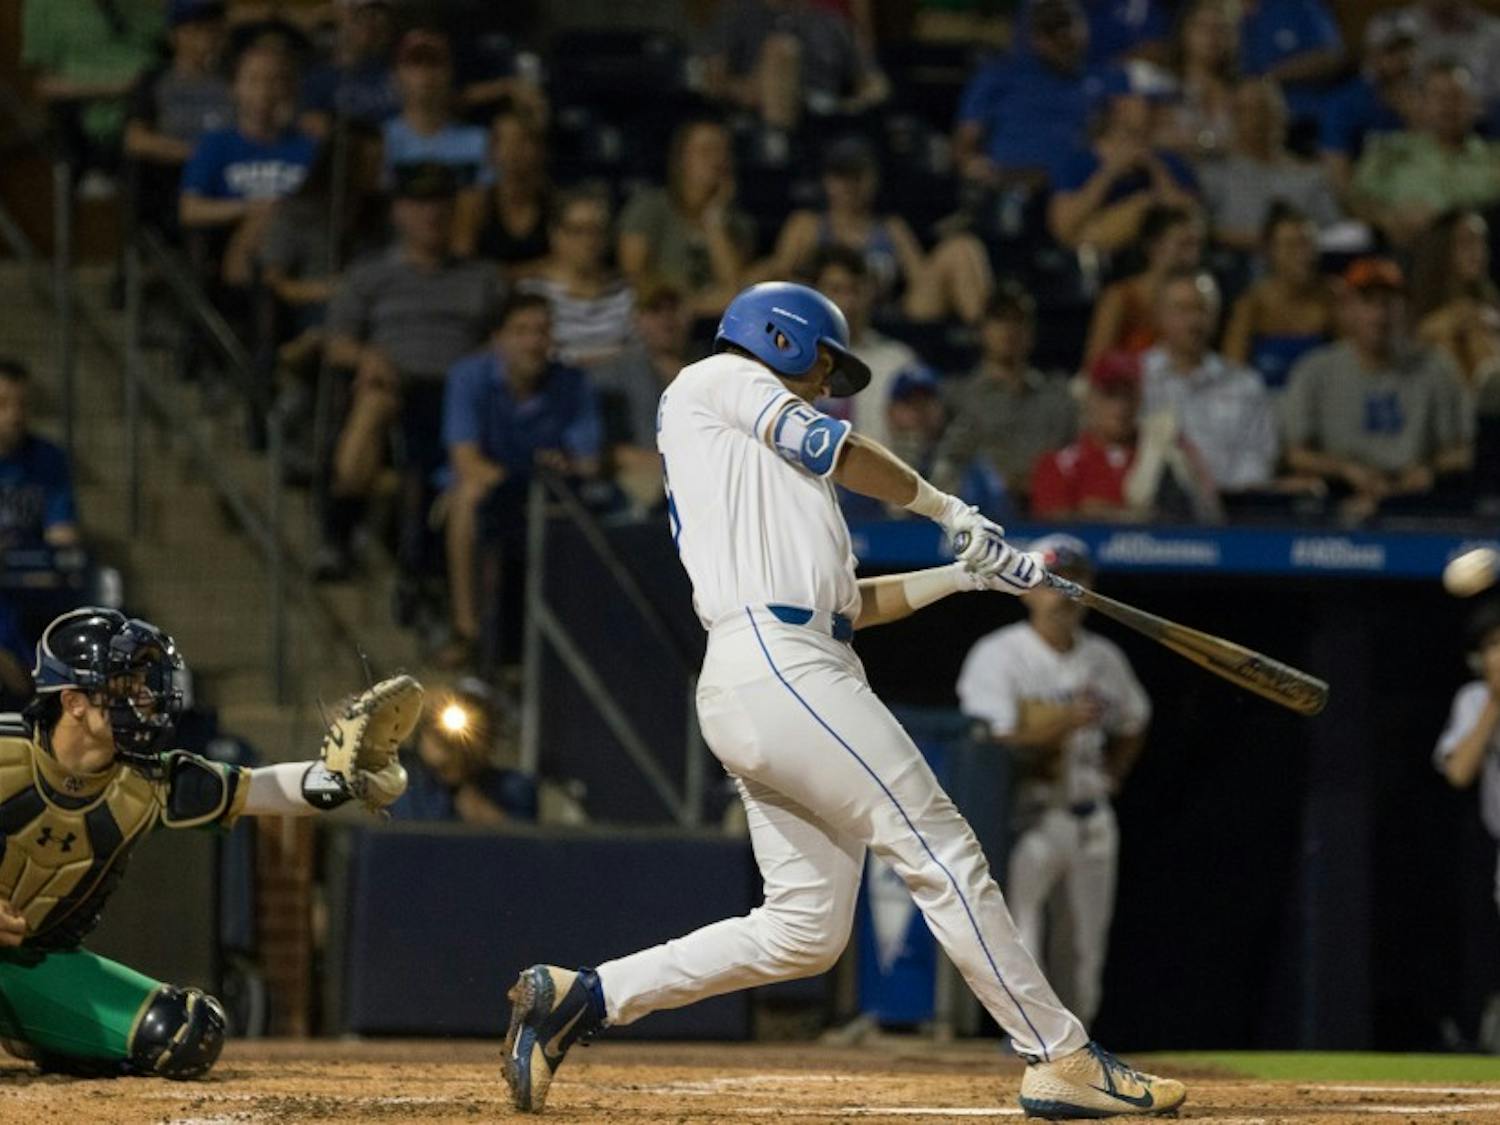 Junior catcher Michael Rothenberg is just one of the many strong bats in Duke's lineup.